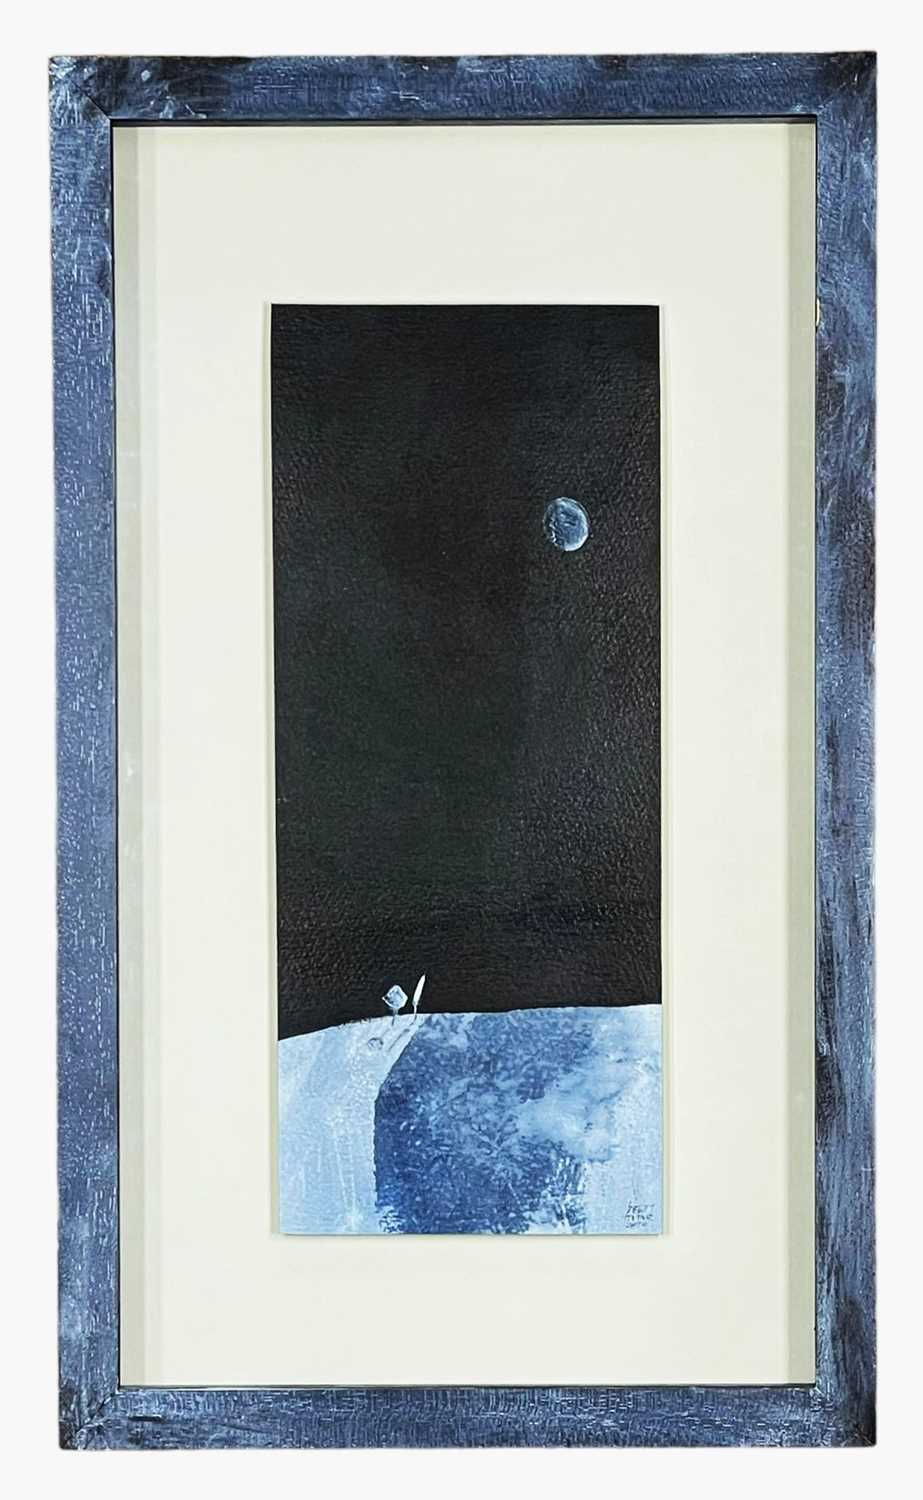 ‡ DEWI TUDUR mixed media on card - nocturnal landscape under moon , signed and dated 2010, 33 x - Image 2 of 2